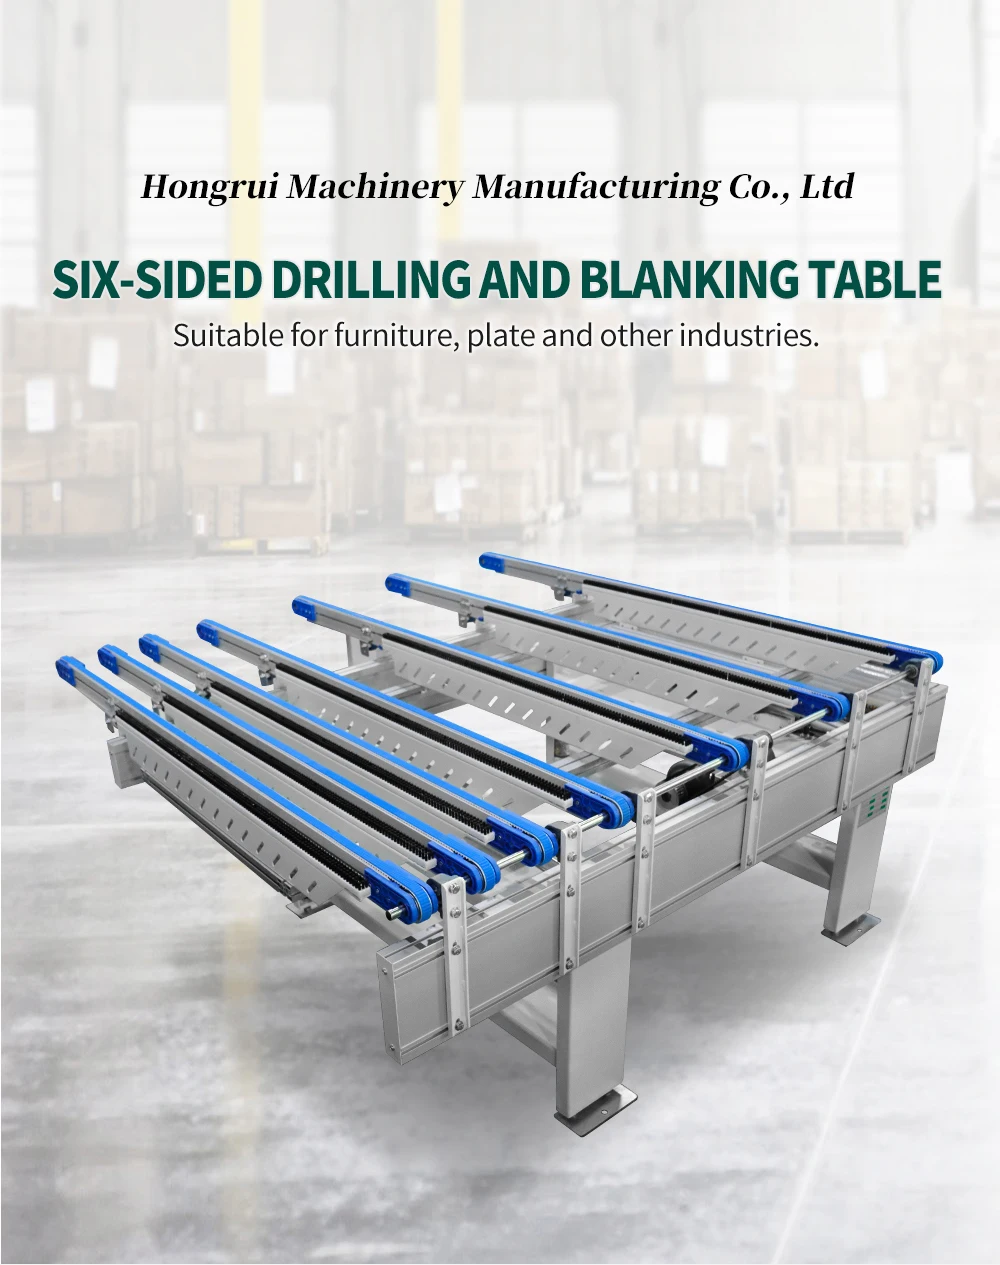 Roller conveyor of Hongrui factory assembly line, six-sided drill feeder details